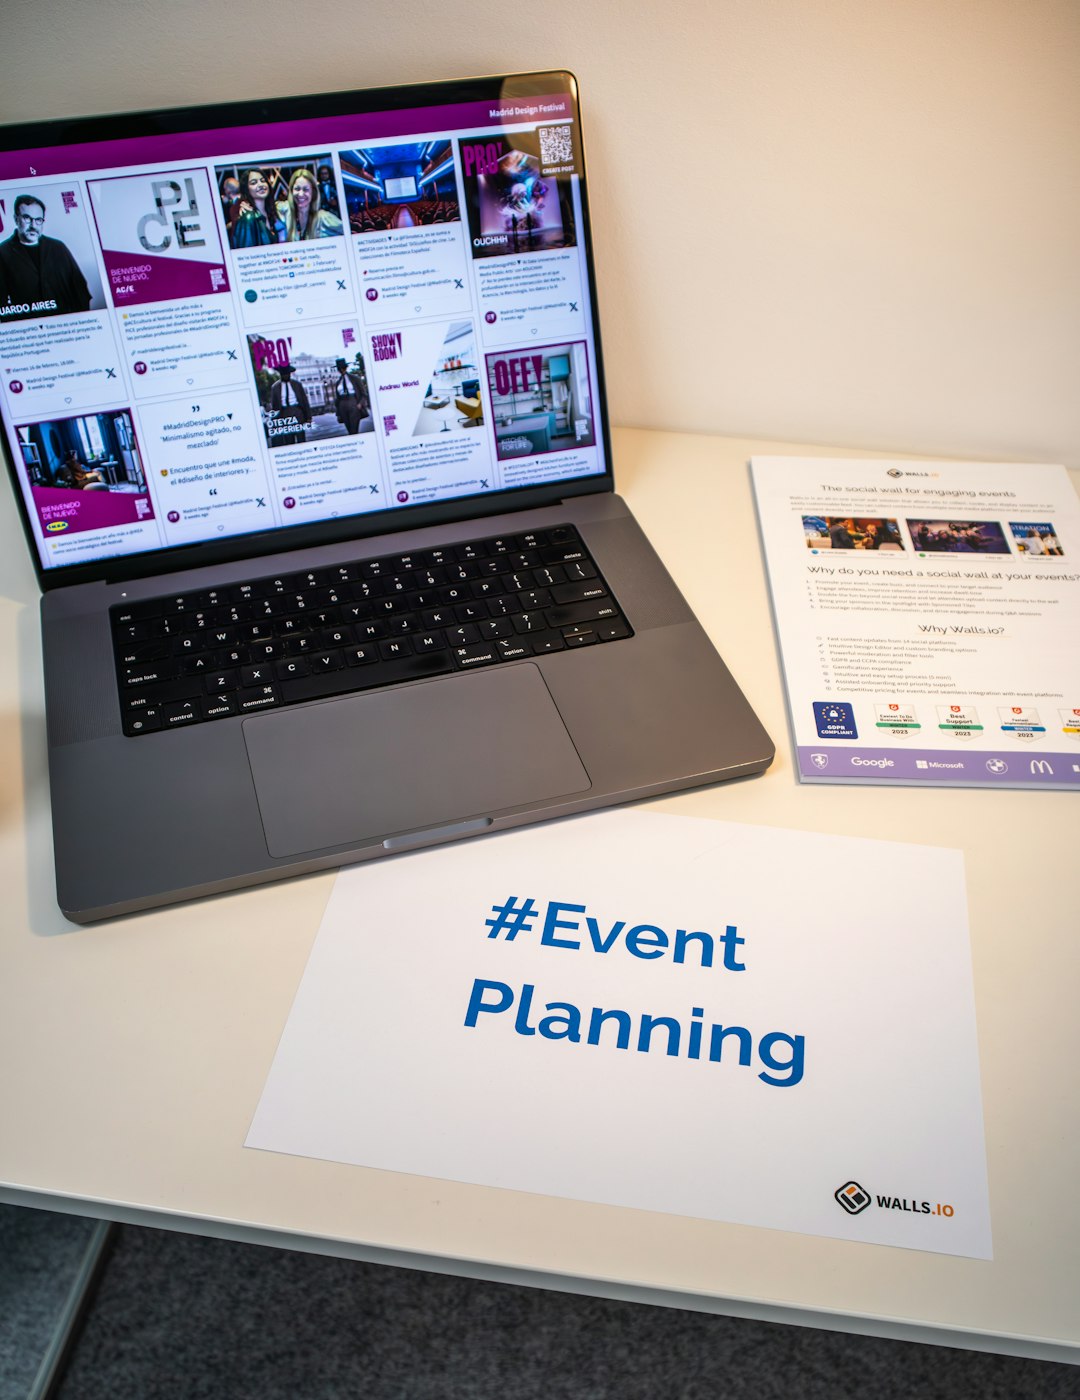 A desk with an event flyer, a piece of paper with the hashtag #EventPlanning and a laptop showing a social media wall